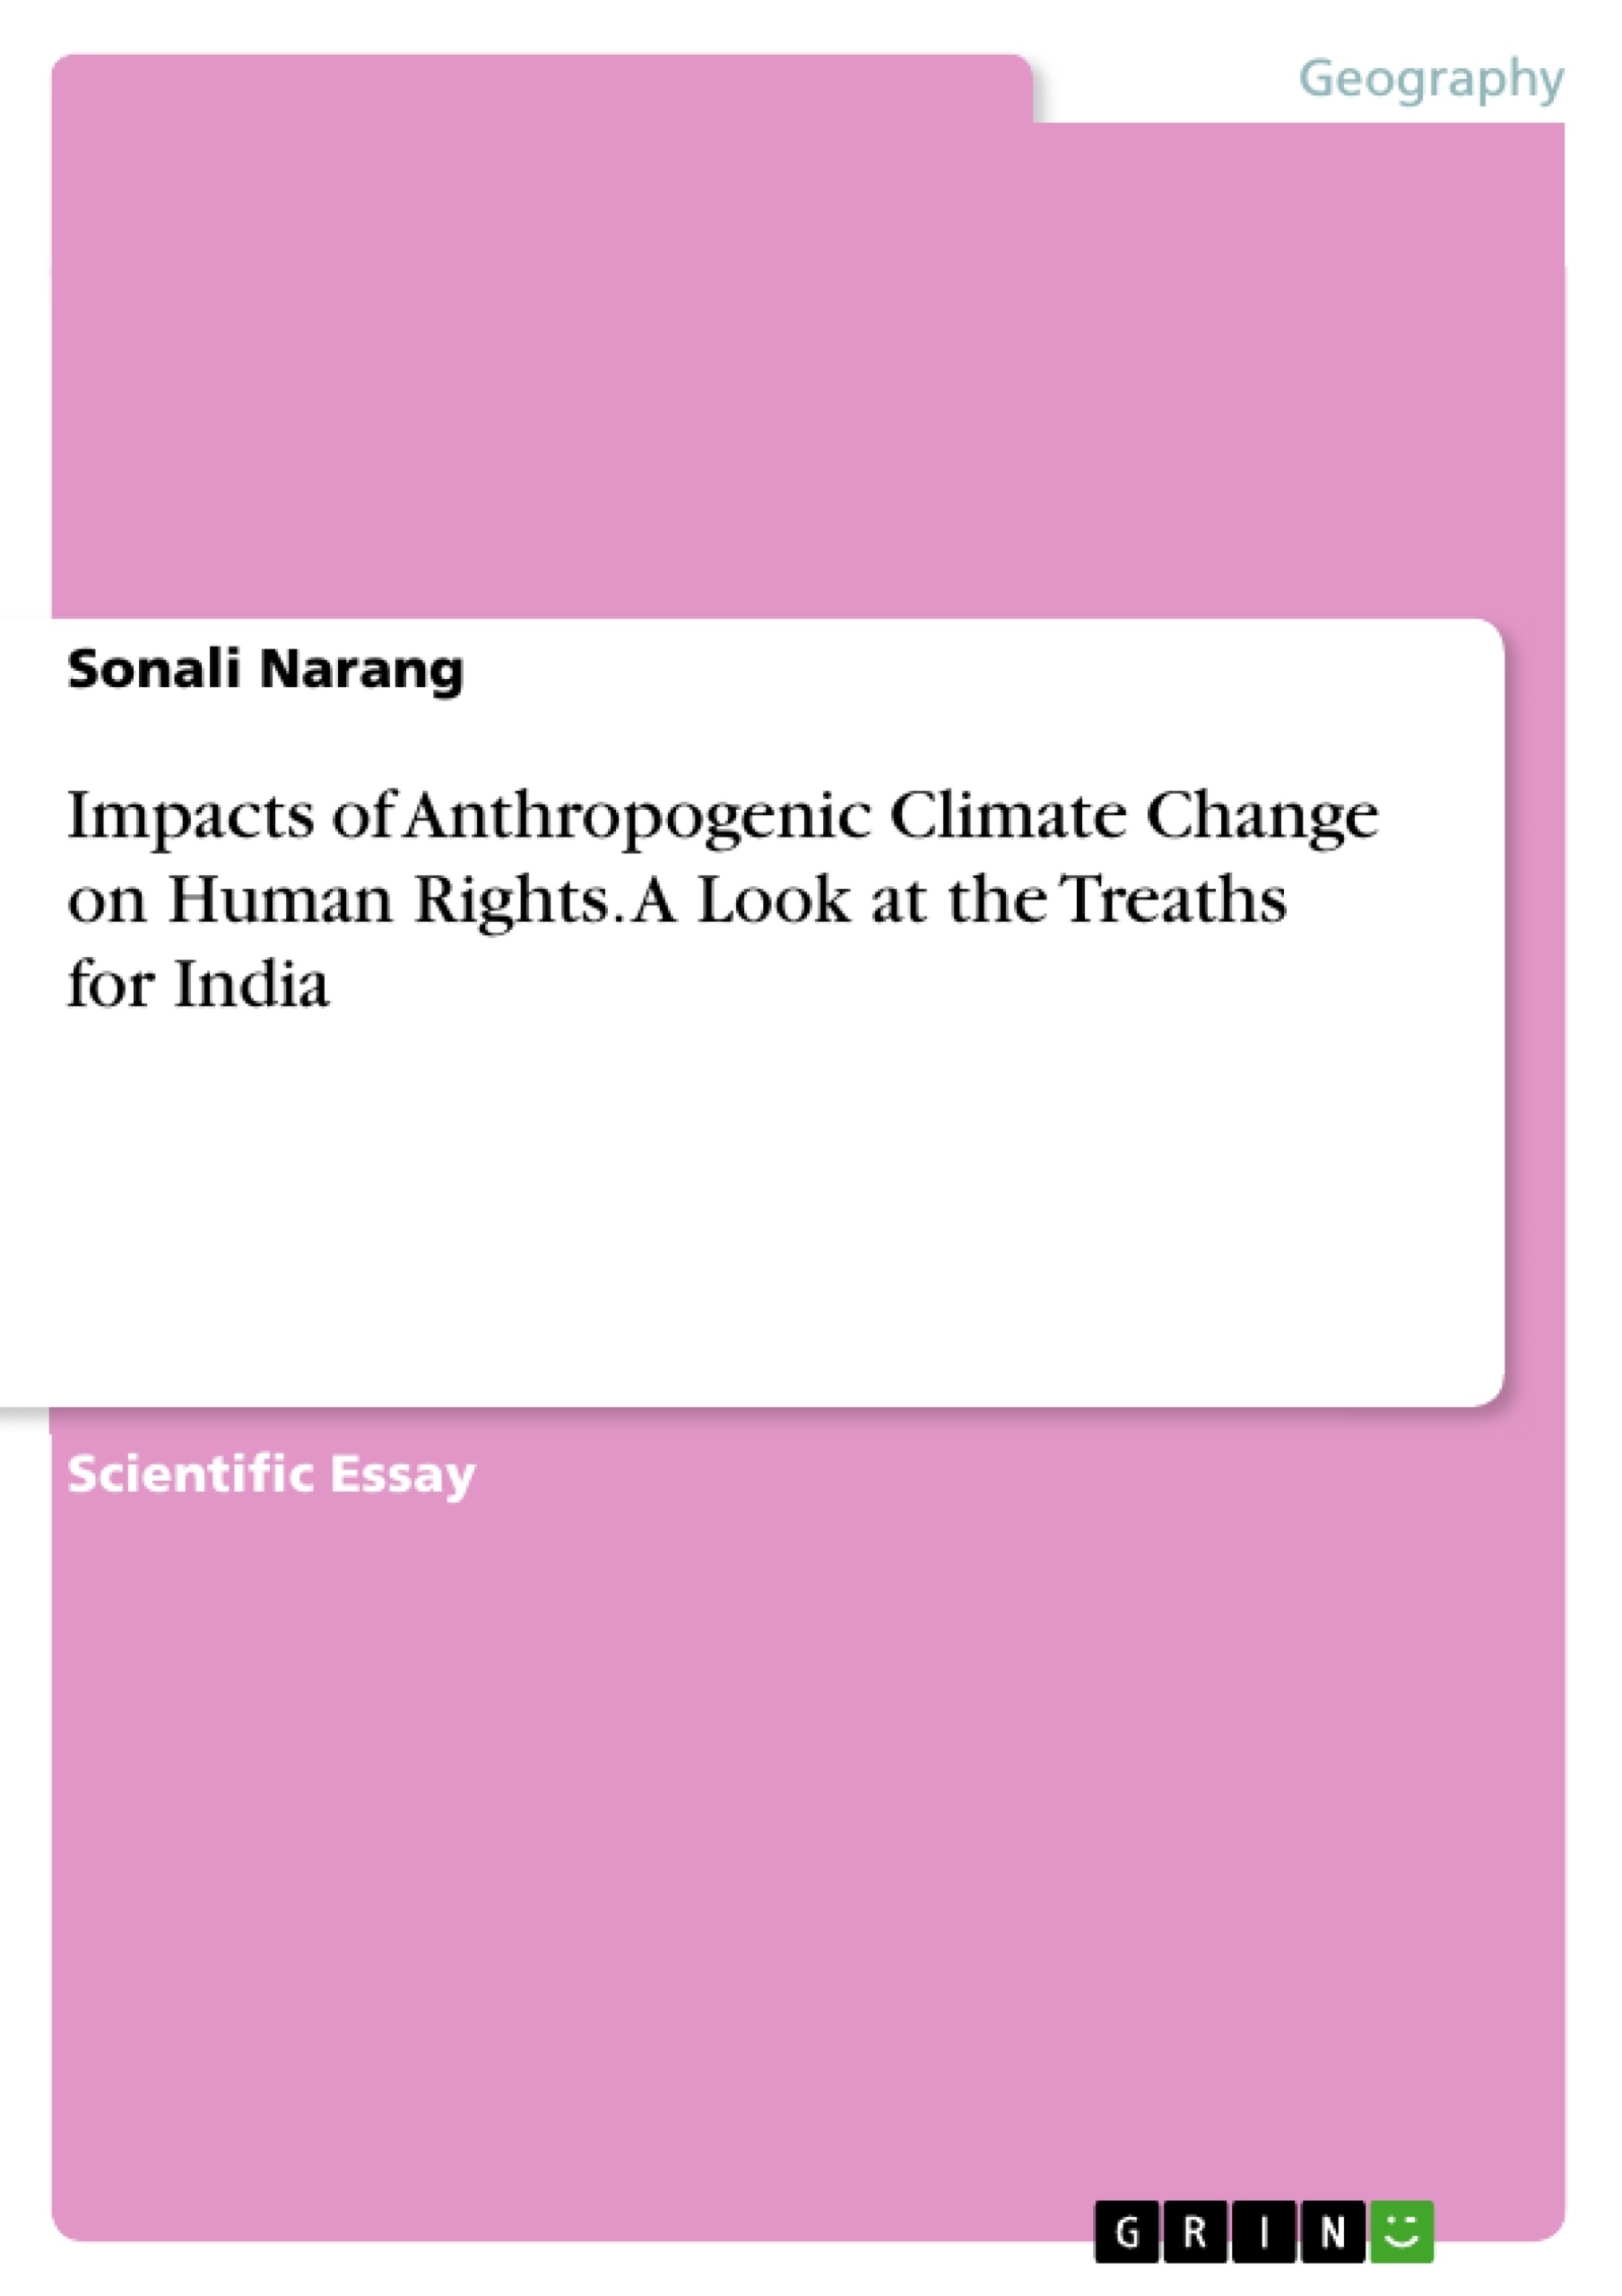 Titre: Impacts of Anthropogenic Climate Change on Human Rights. A Look at the Treaths for India